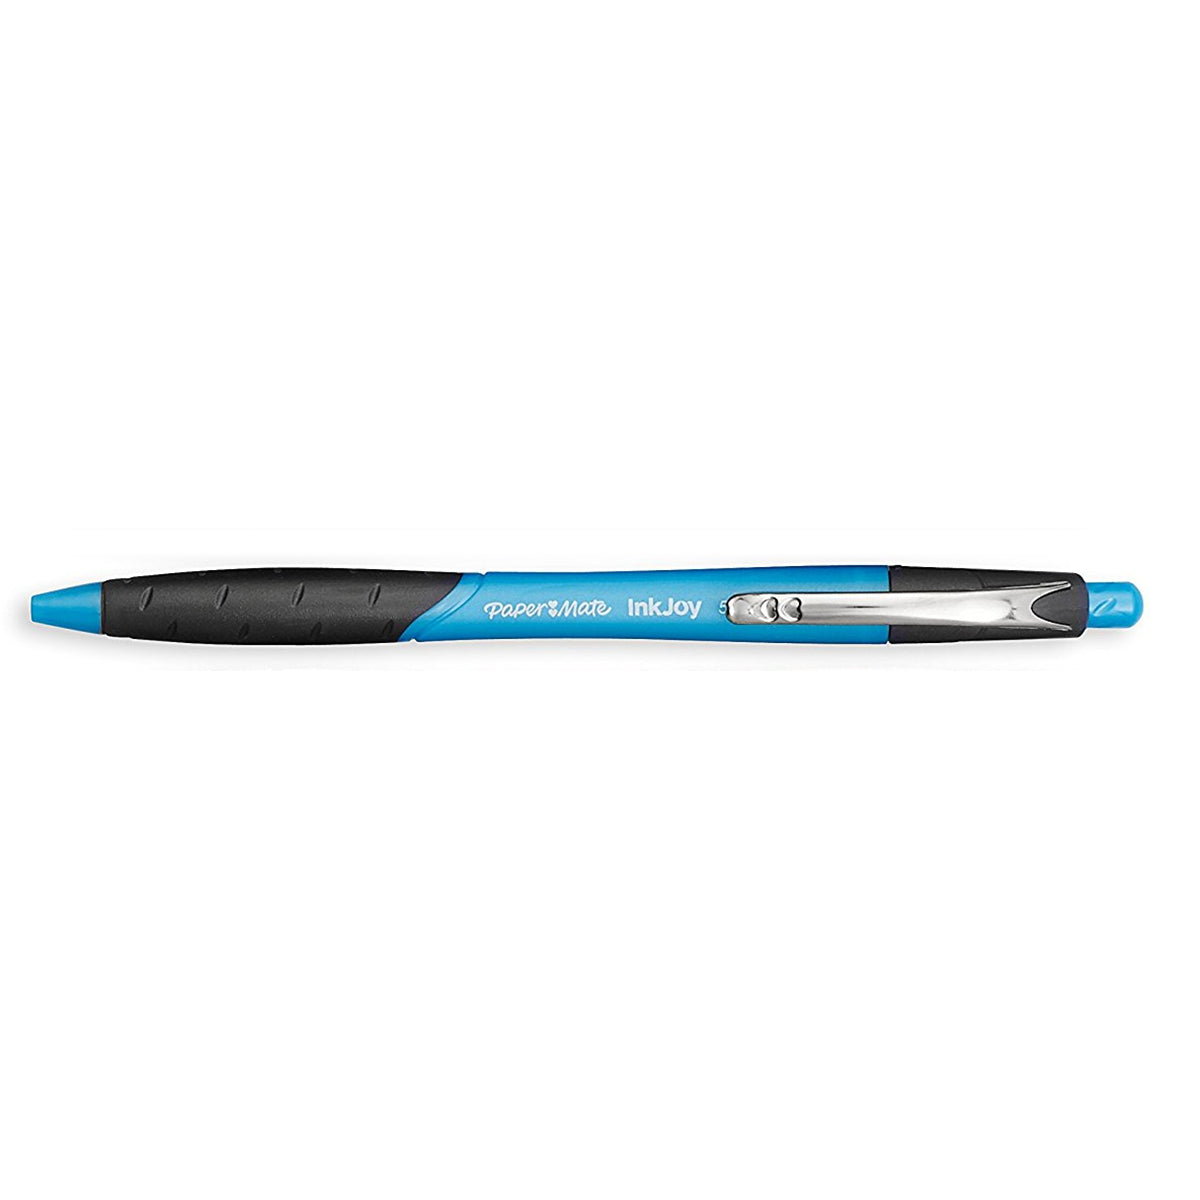 Paper Mate InkJoy 500RT Turquoise Retractable Ballpoint Pen Medium  Paper Mate Ballpoint Pen